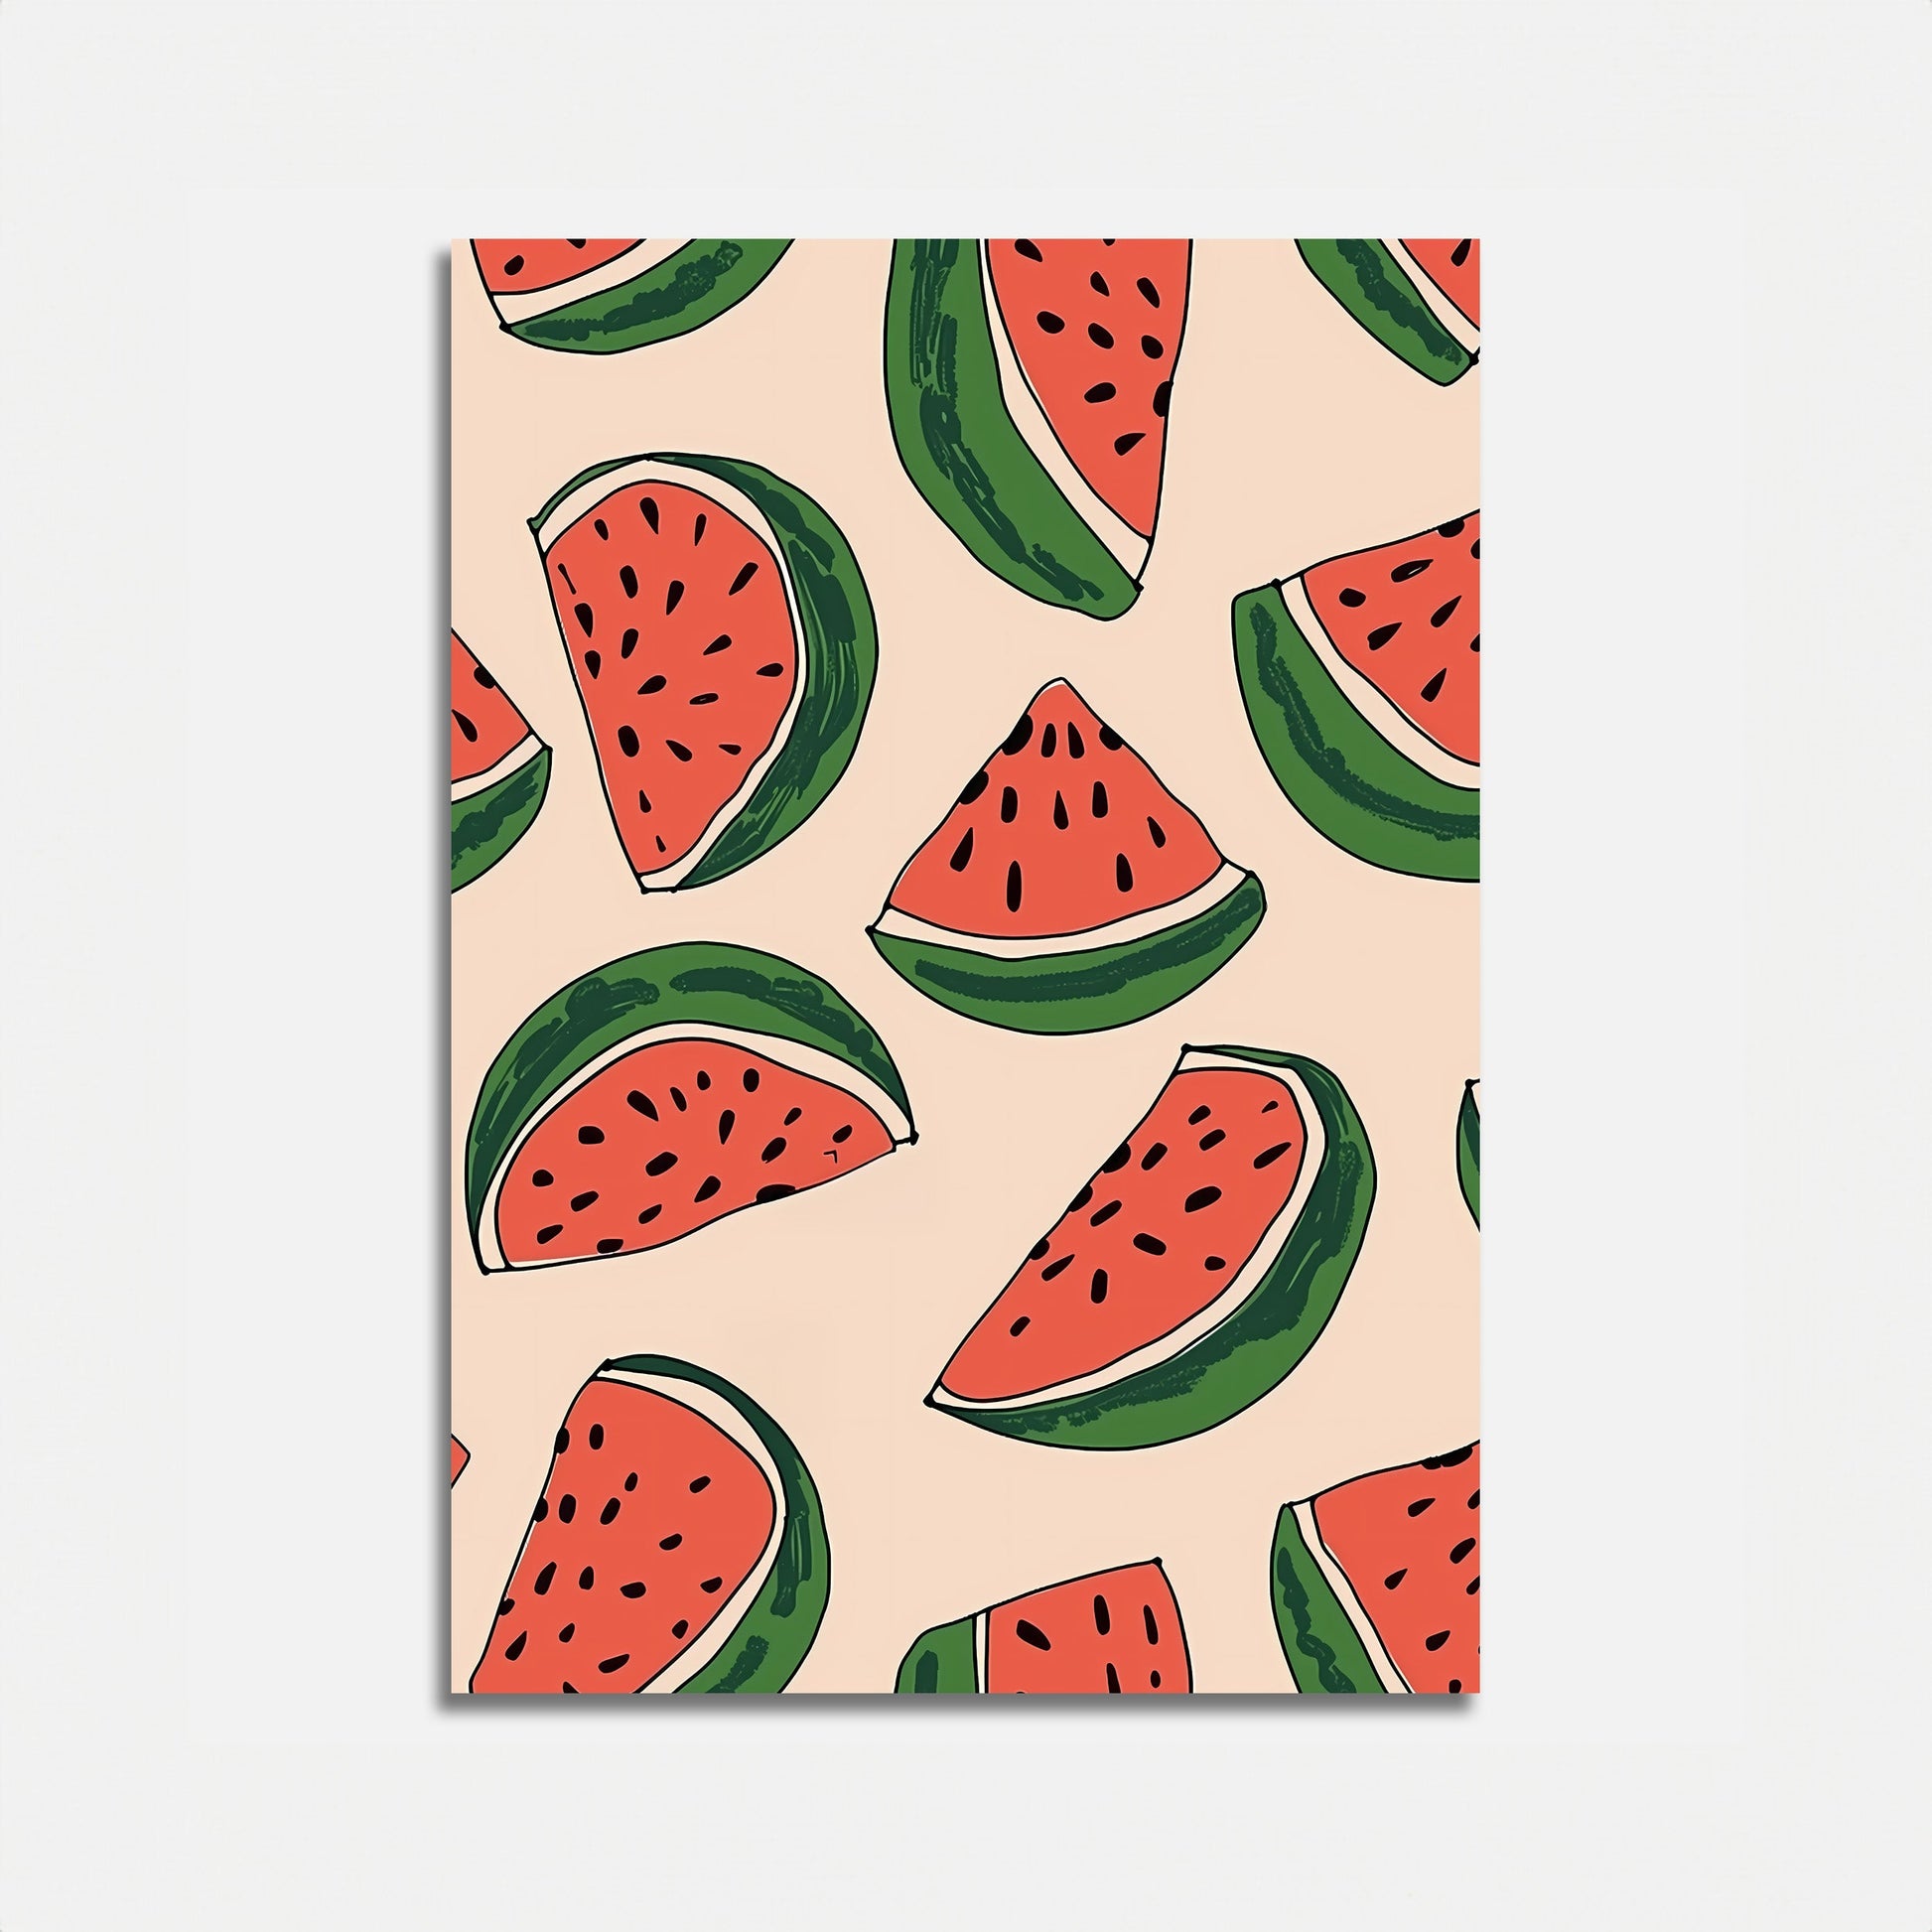 A notebook with a watermelon slice pattern on the cover.